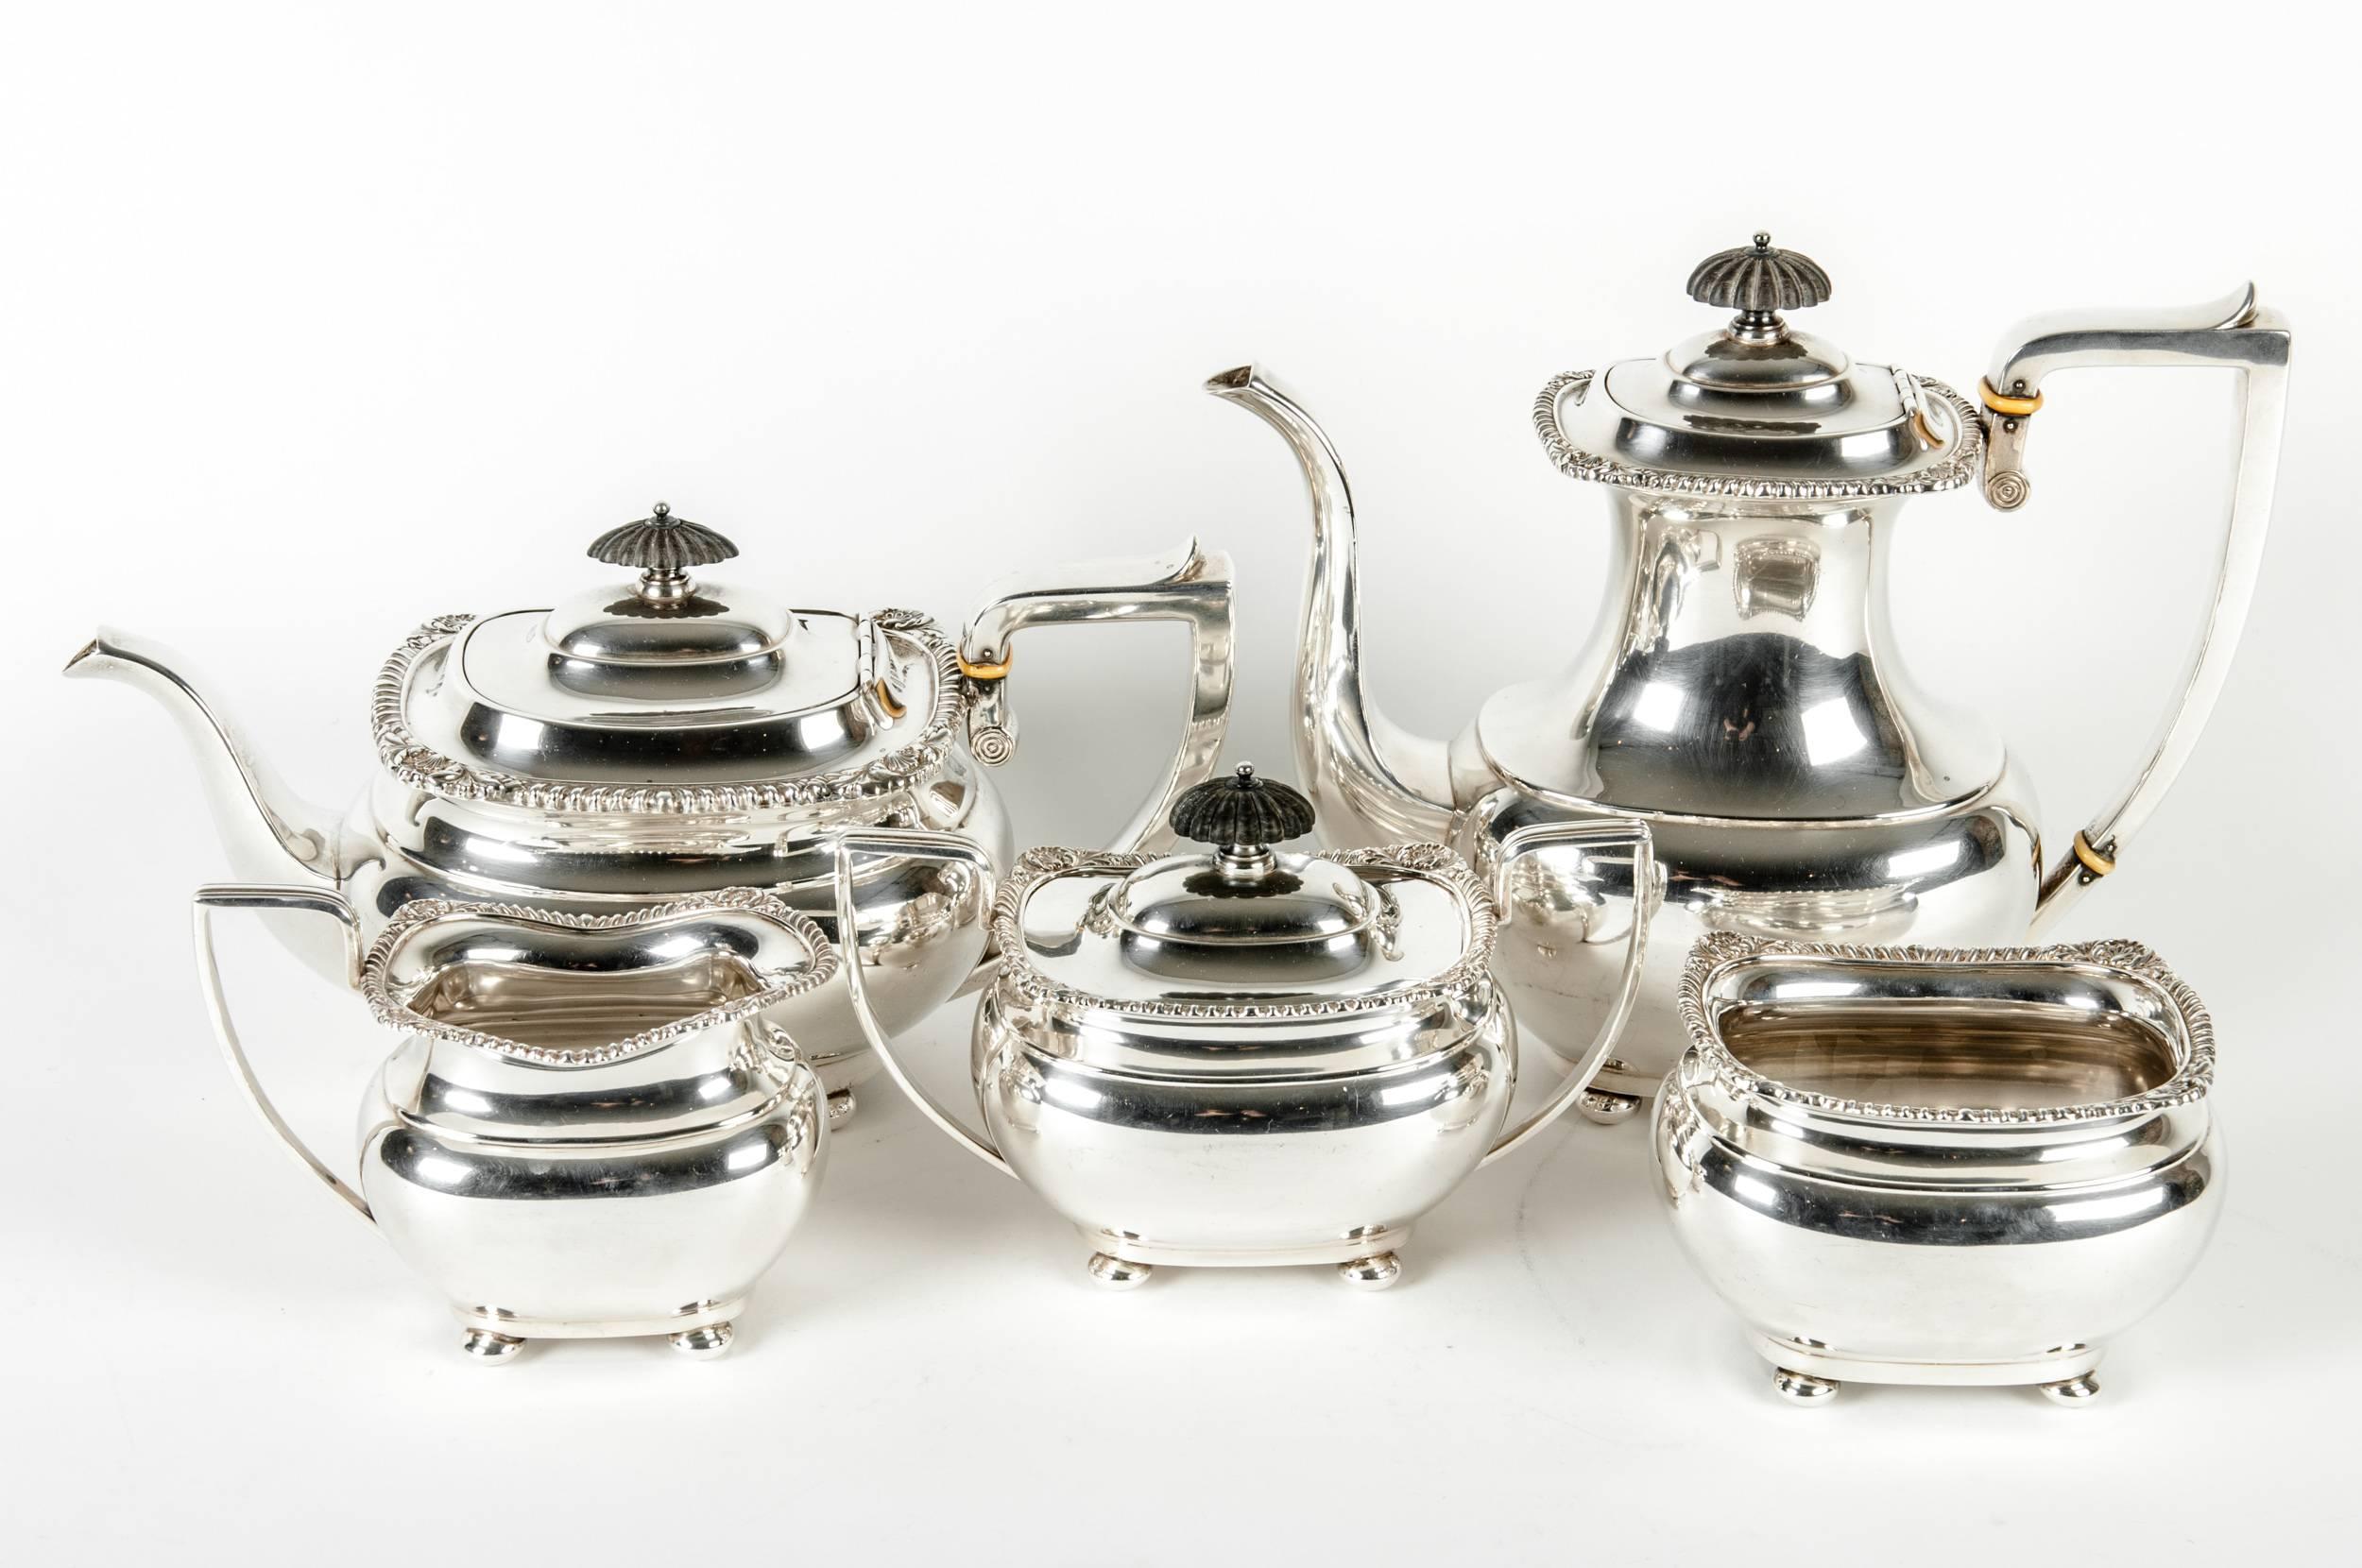 Late 19th century sterling silver tea and coffee five-piece service. The set is in great condition, minor wear consistent with age / use. Maker's mark undersigned. The tea pot 12